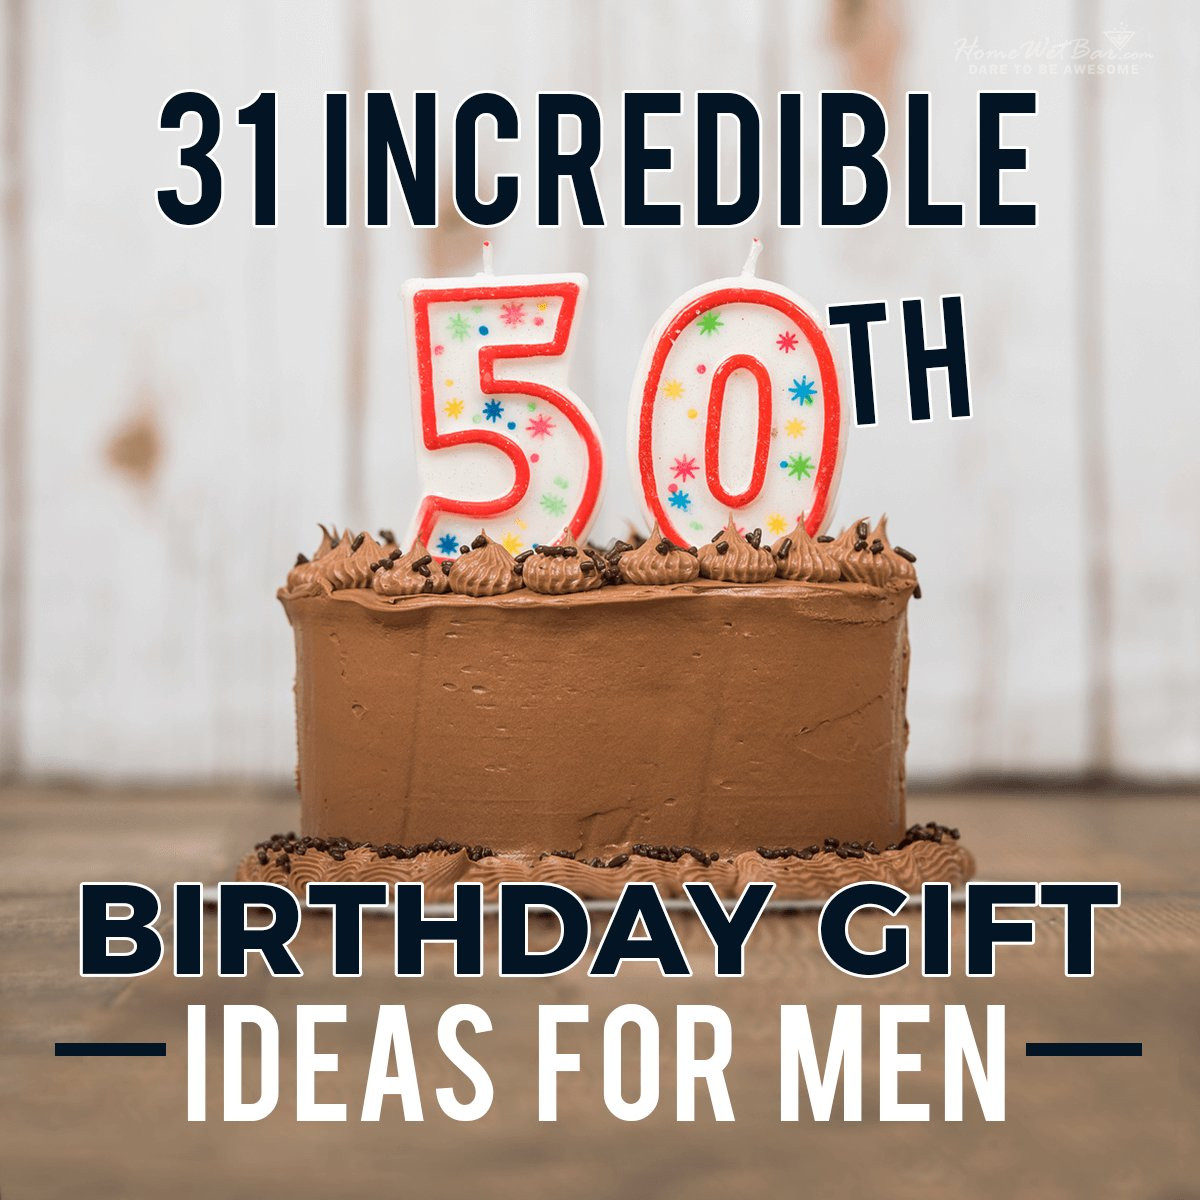 50 Birthday Gift Ideas
 31 Incredible 50th Birthday Gift Ideas for Men